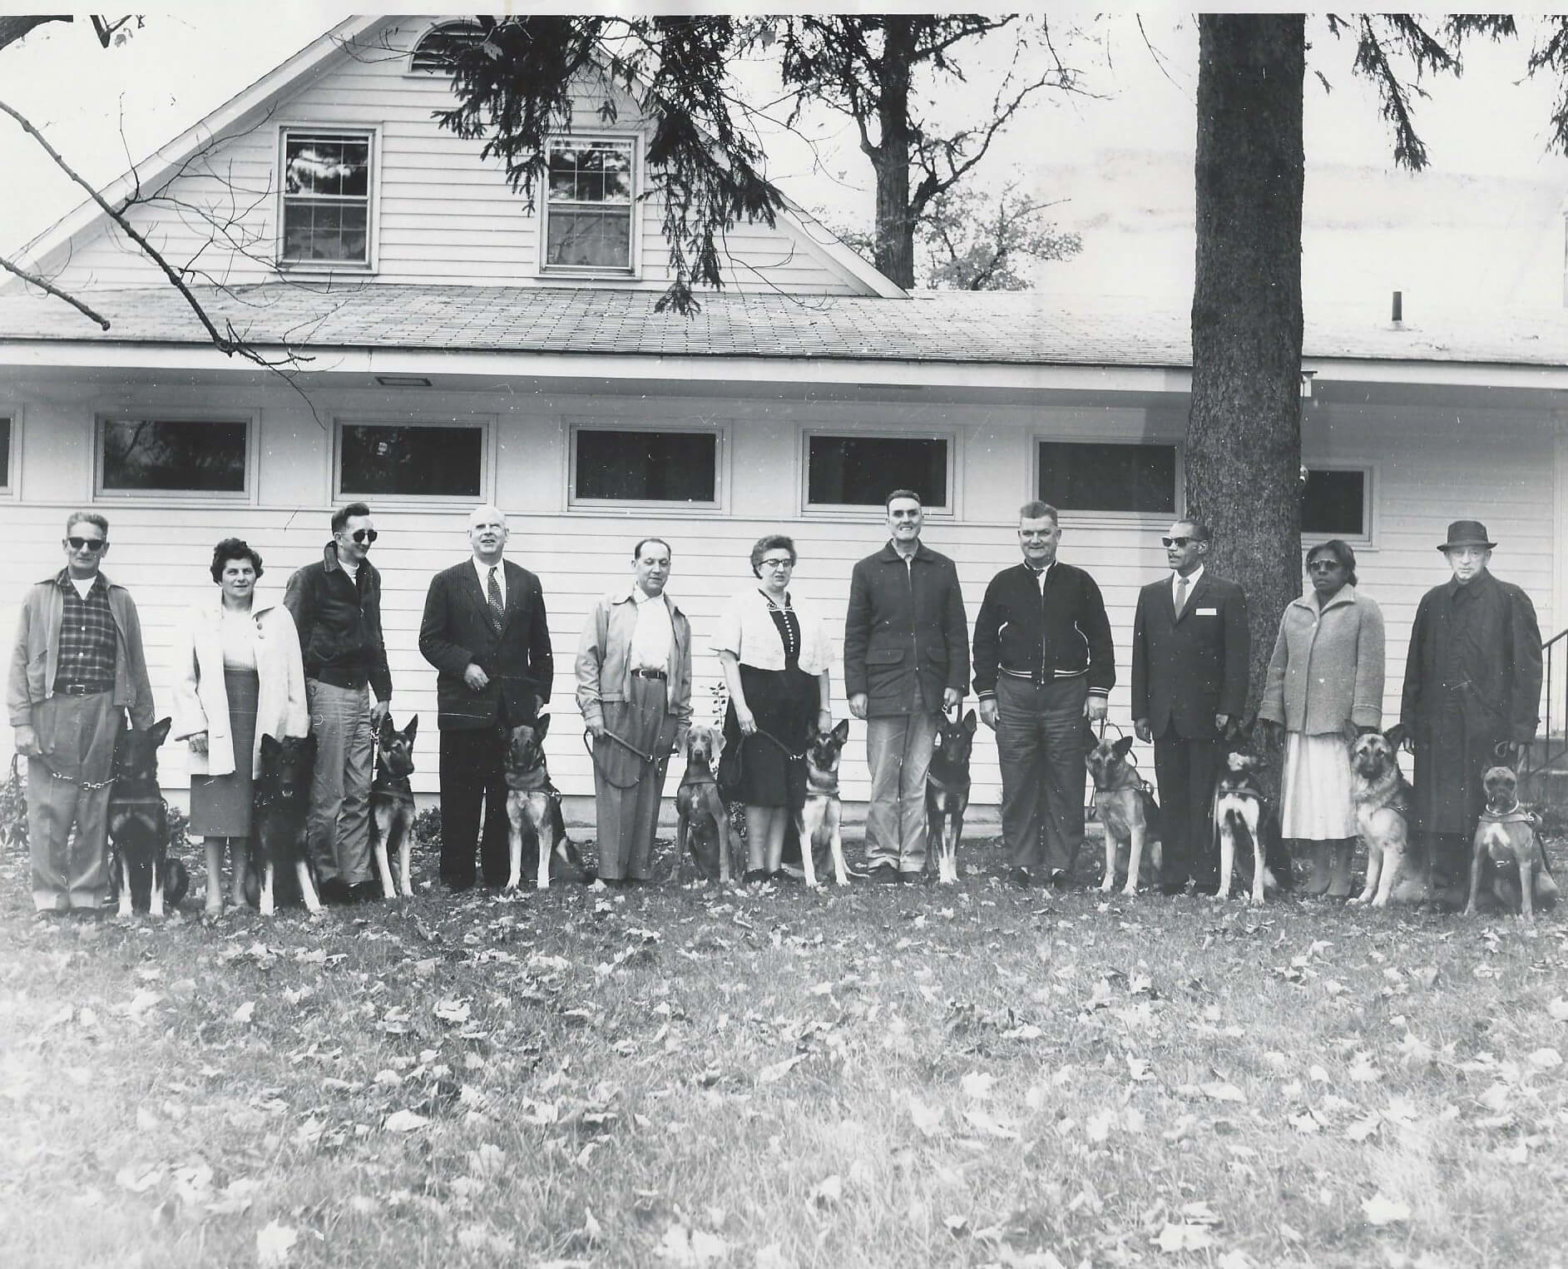 A Guiding Eyes graduate class from 1959